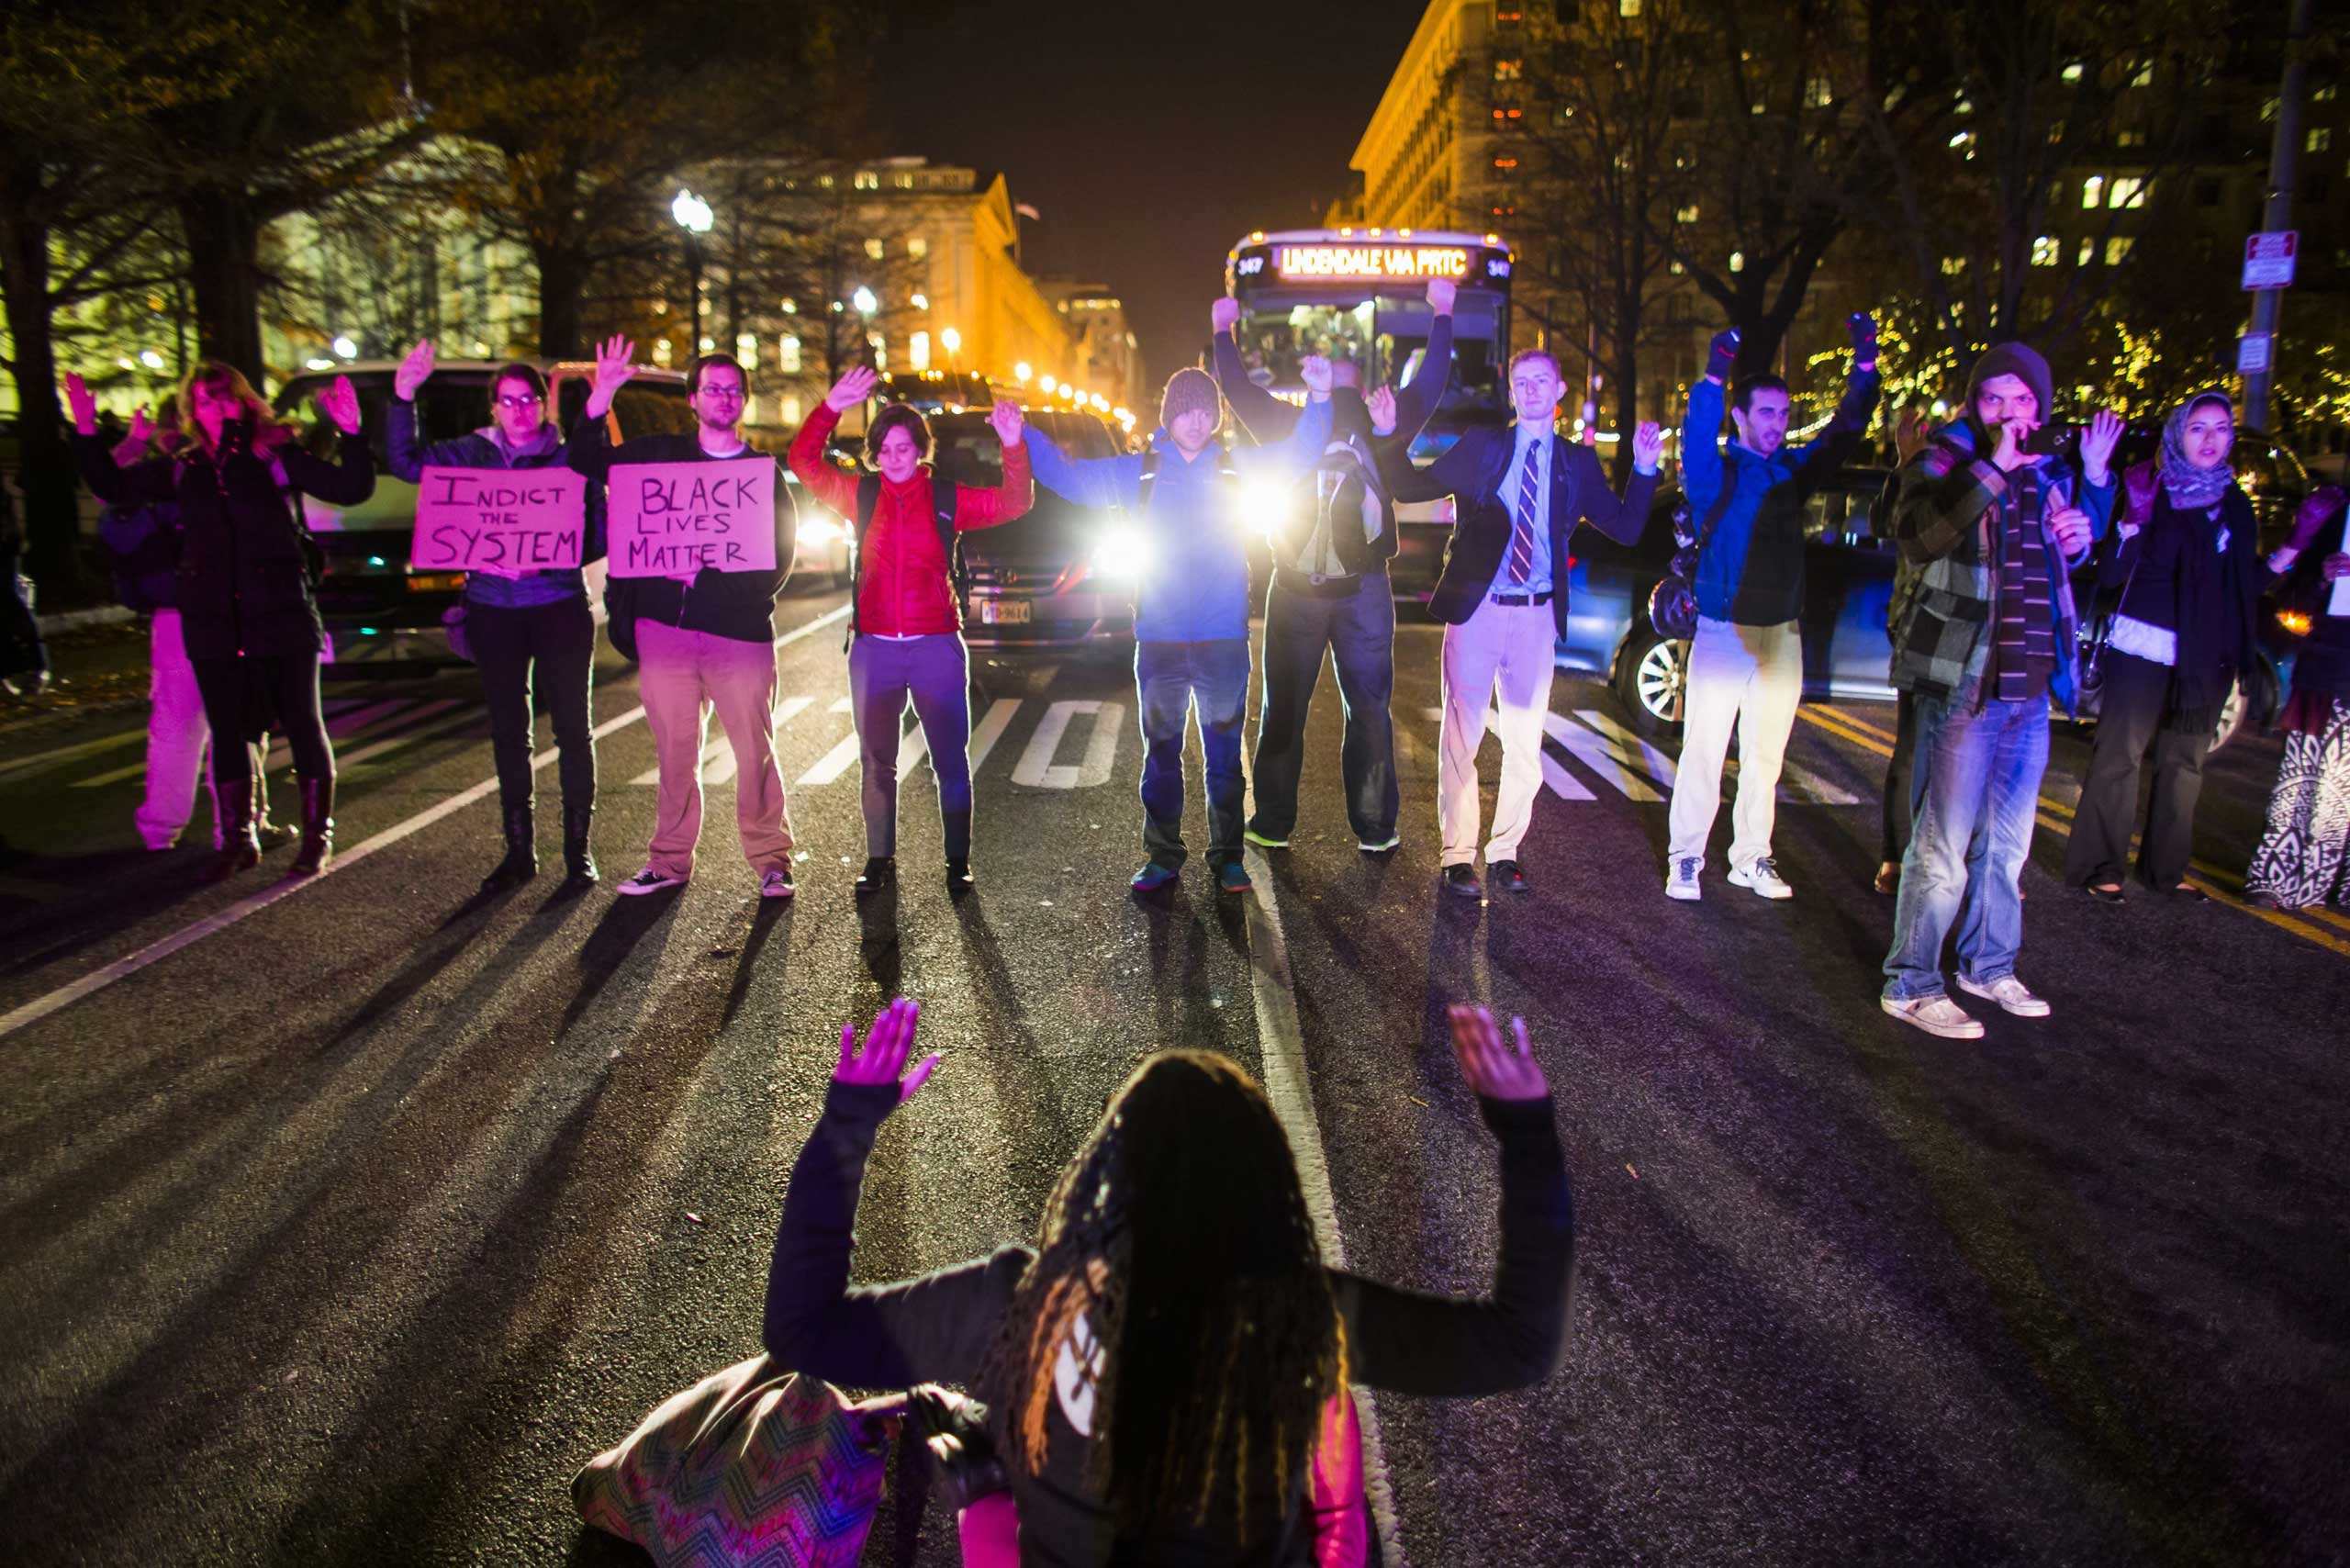 Protestors block 15th Street near Pennsylvania Avenue to protest the Staten Island grand jury's decision not to indict officer Daniel Pantaleo in the Eric Garner chokehold case in Washington on Dec. 3, 2014.